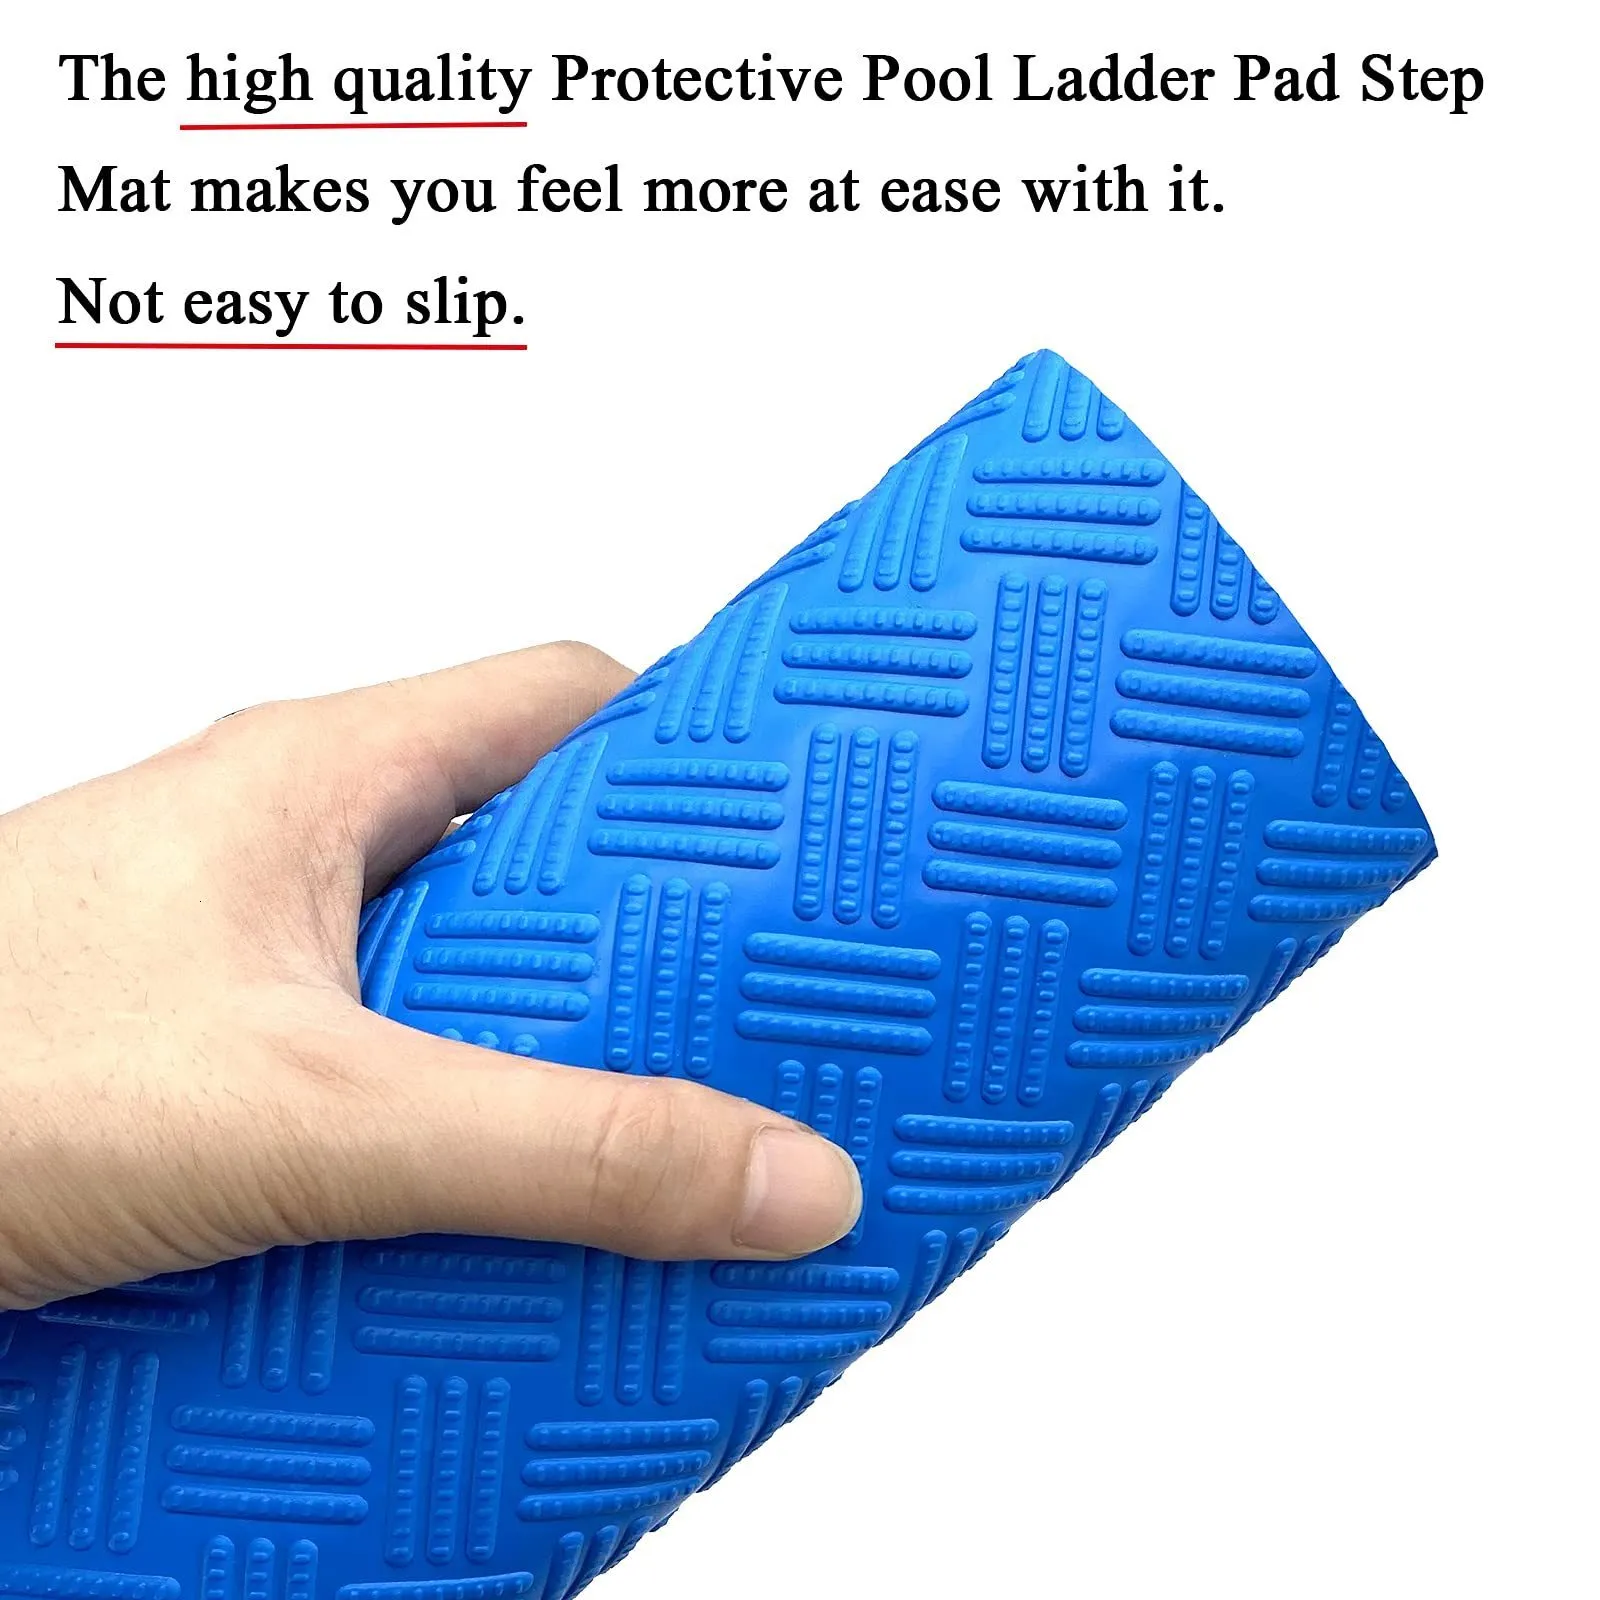 Blue Anti Slip Pool Ladder Mats With Texture Protection In Hindi 2 Designs  Available From Wai10, $10.71